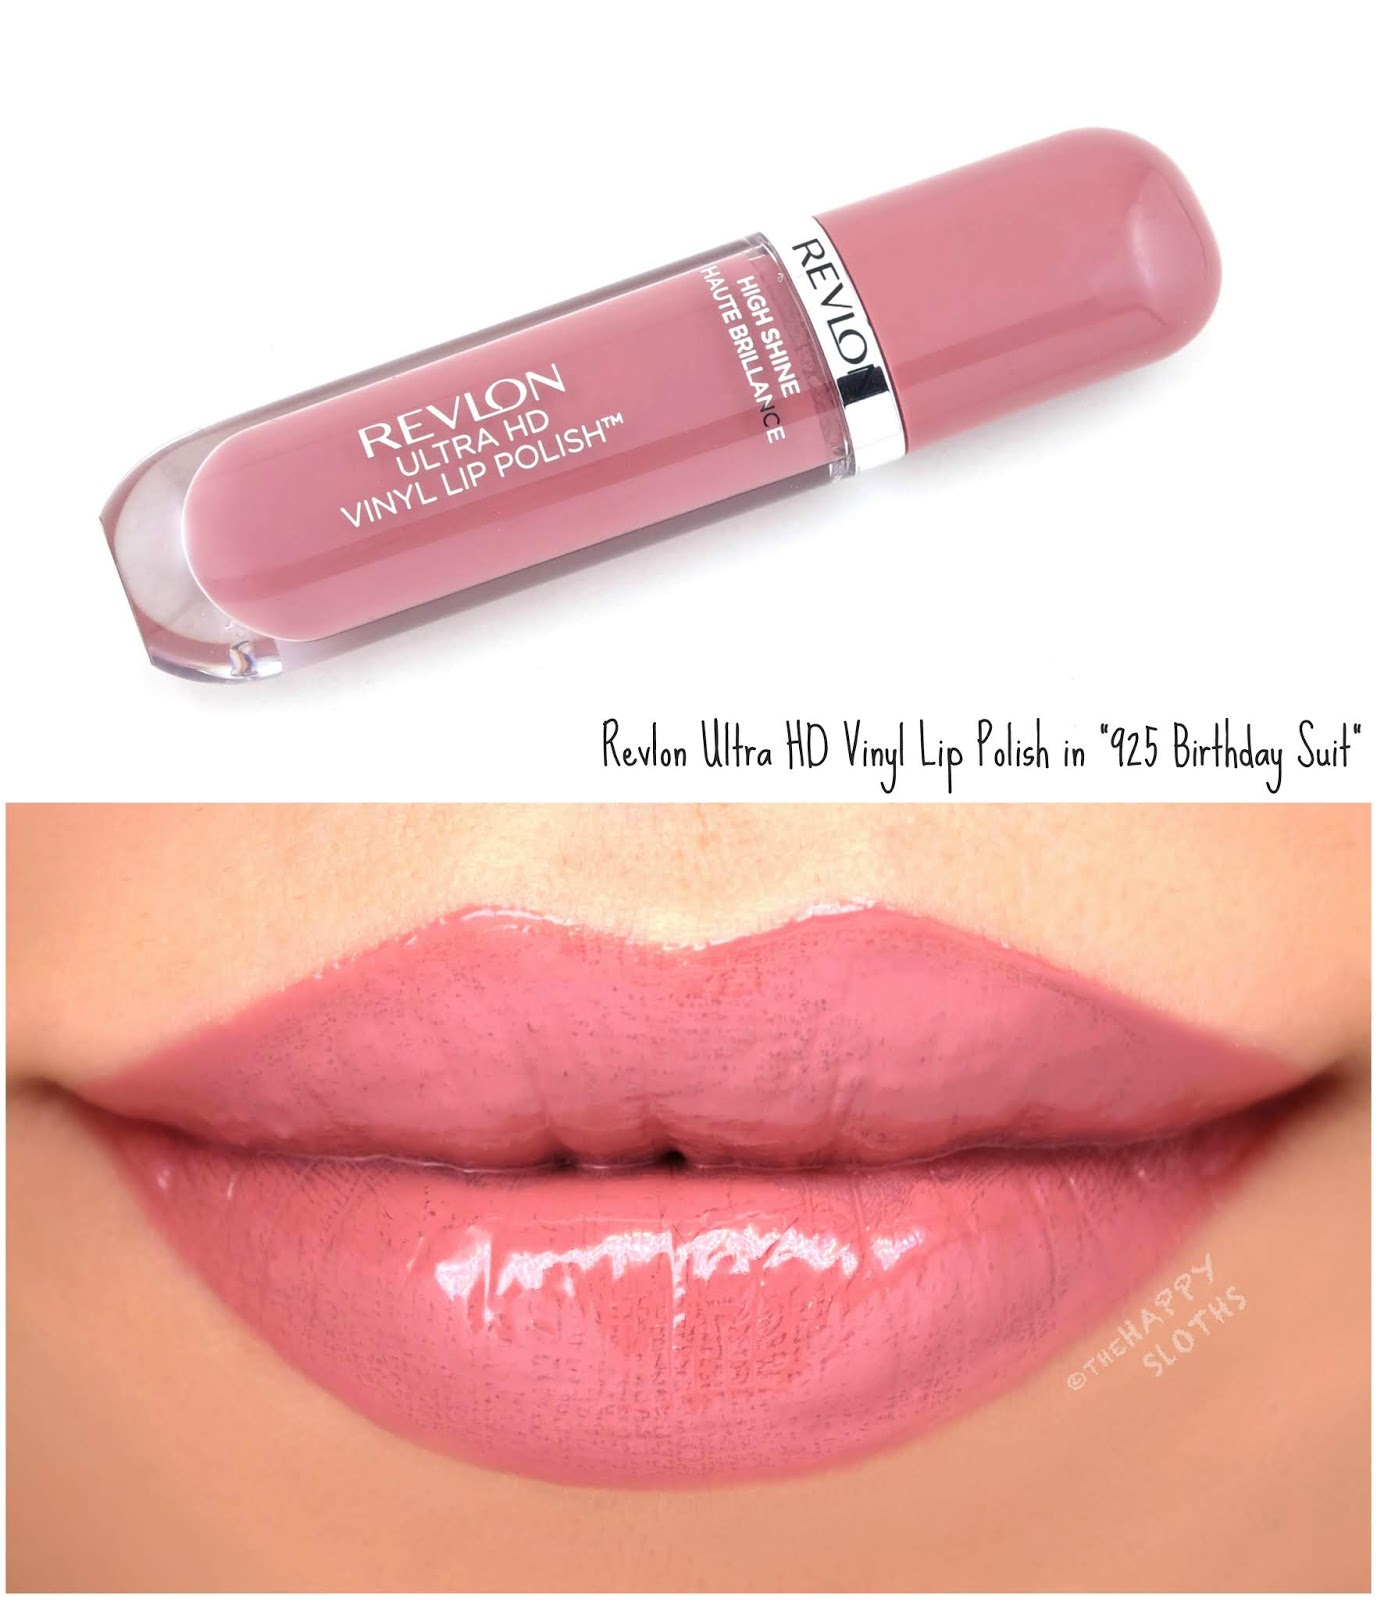 Revlon | Ultra HD Vinyl Lip Polish in "925 Birthday Suit": Review and Swatches